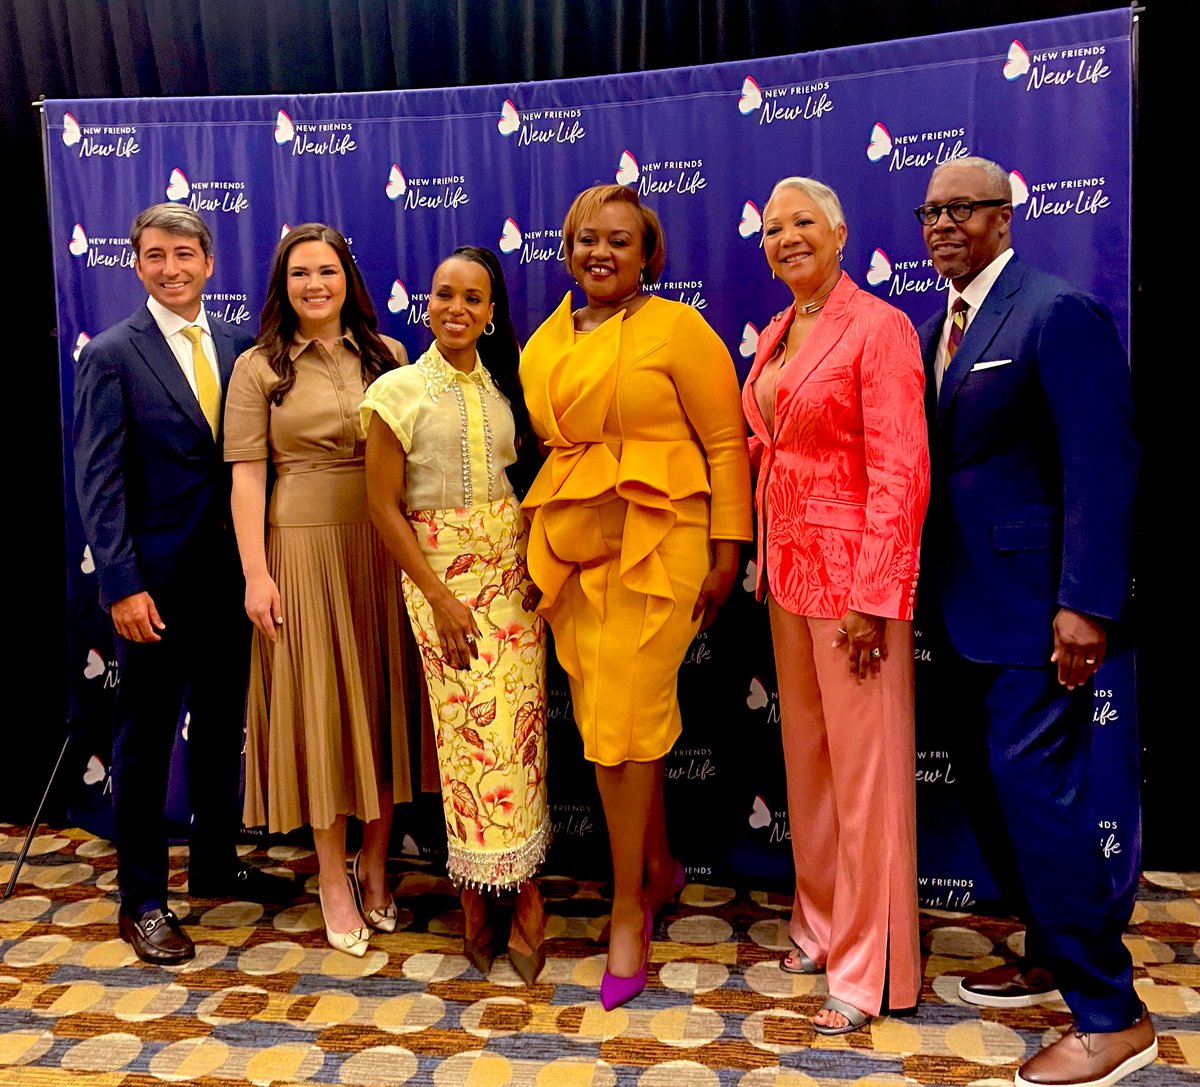 What a day! Loved sharing the story of @nfnlnews over the last 25 years, and having the INCREDIBLE @kerrywashington as our special guest! #standforher #silverjubilee